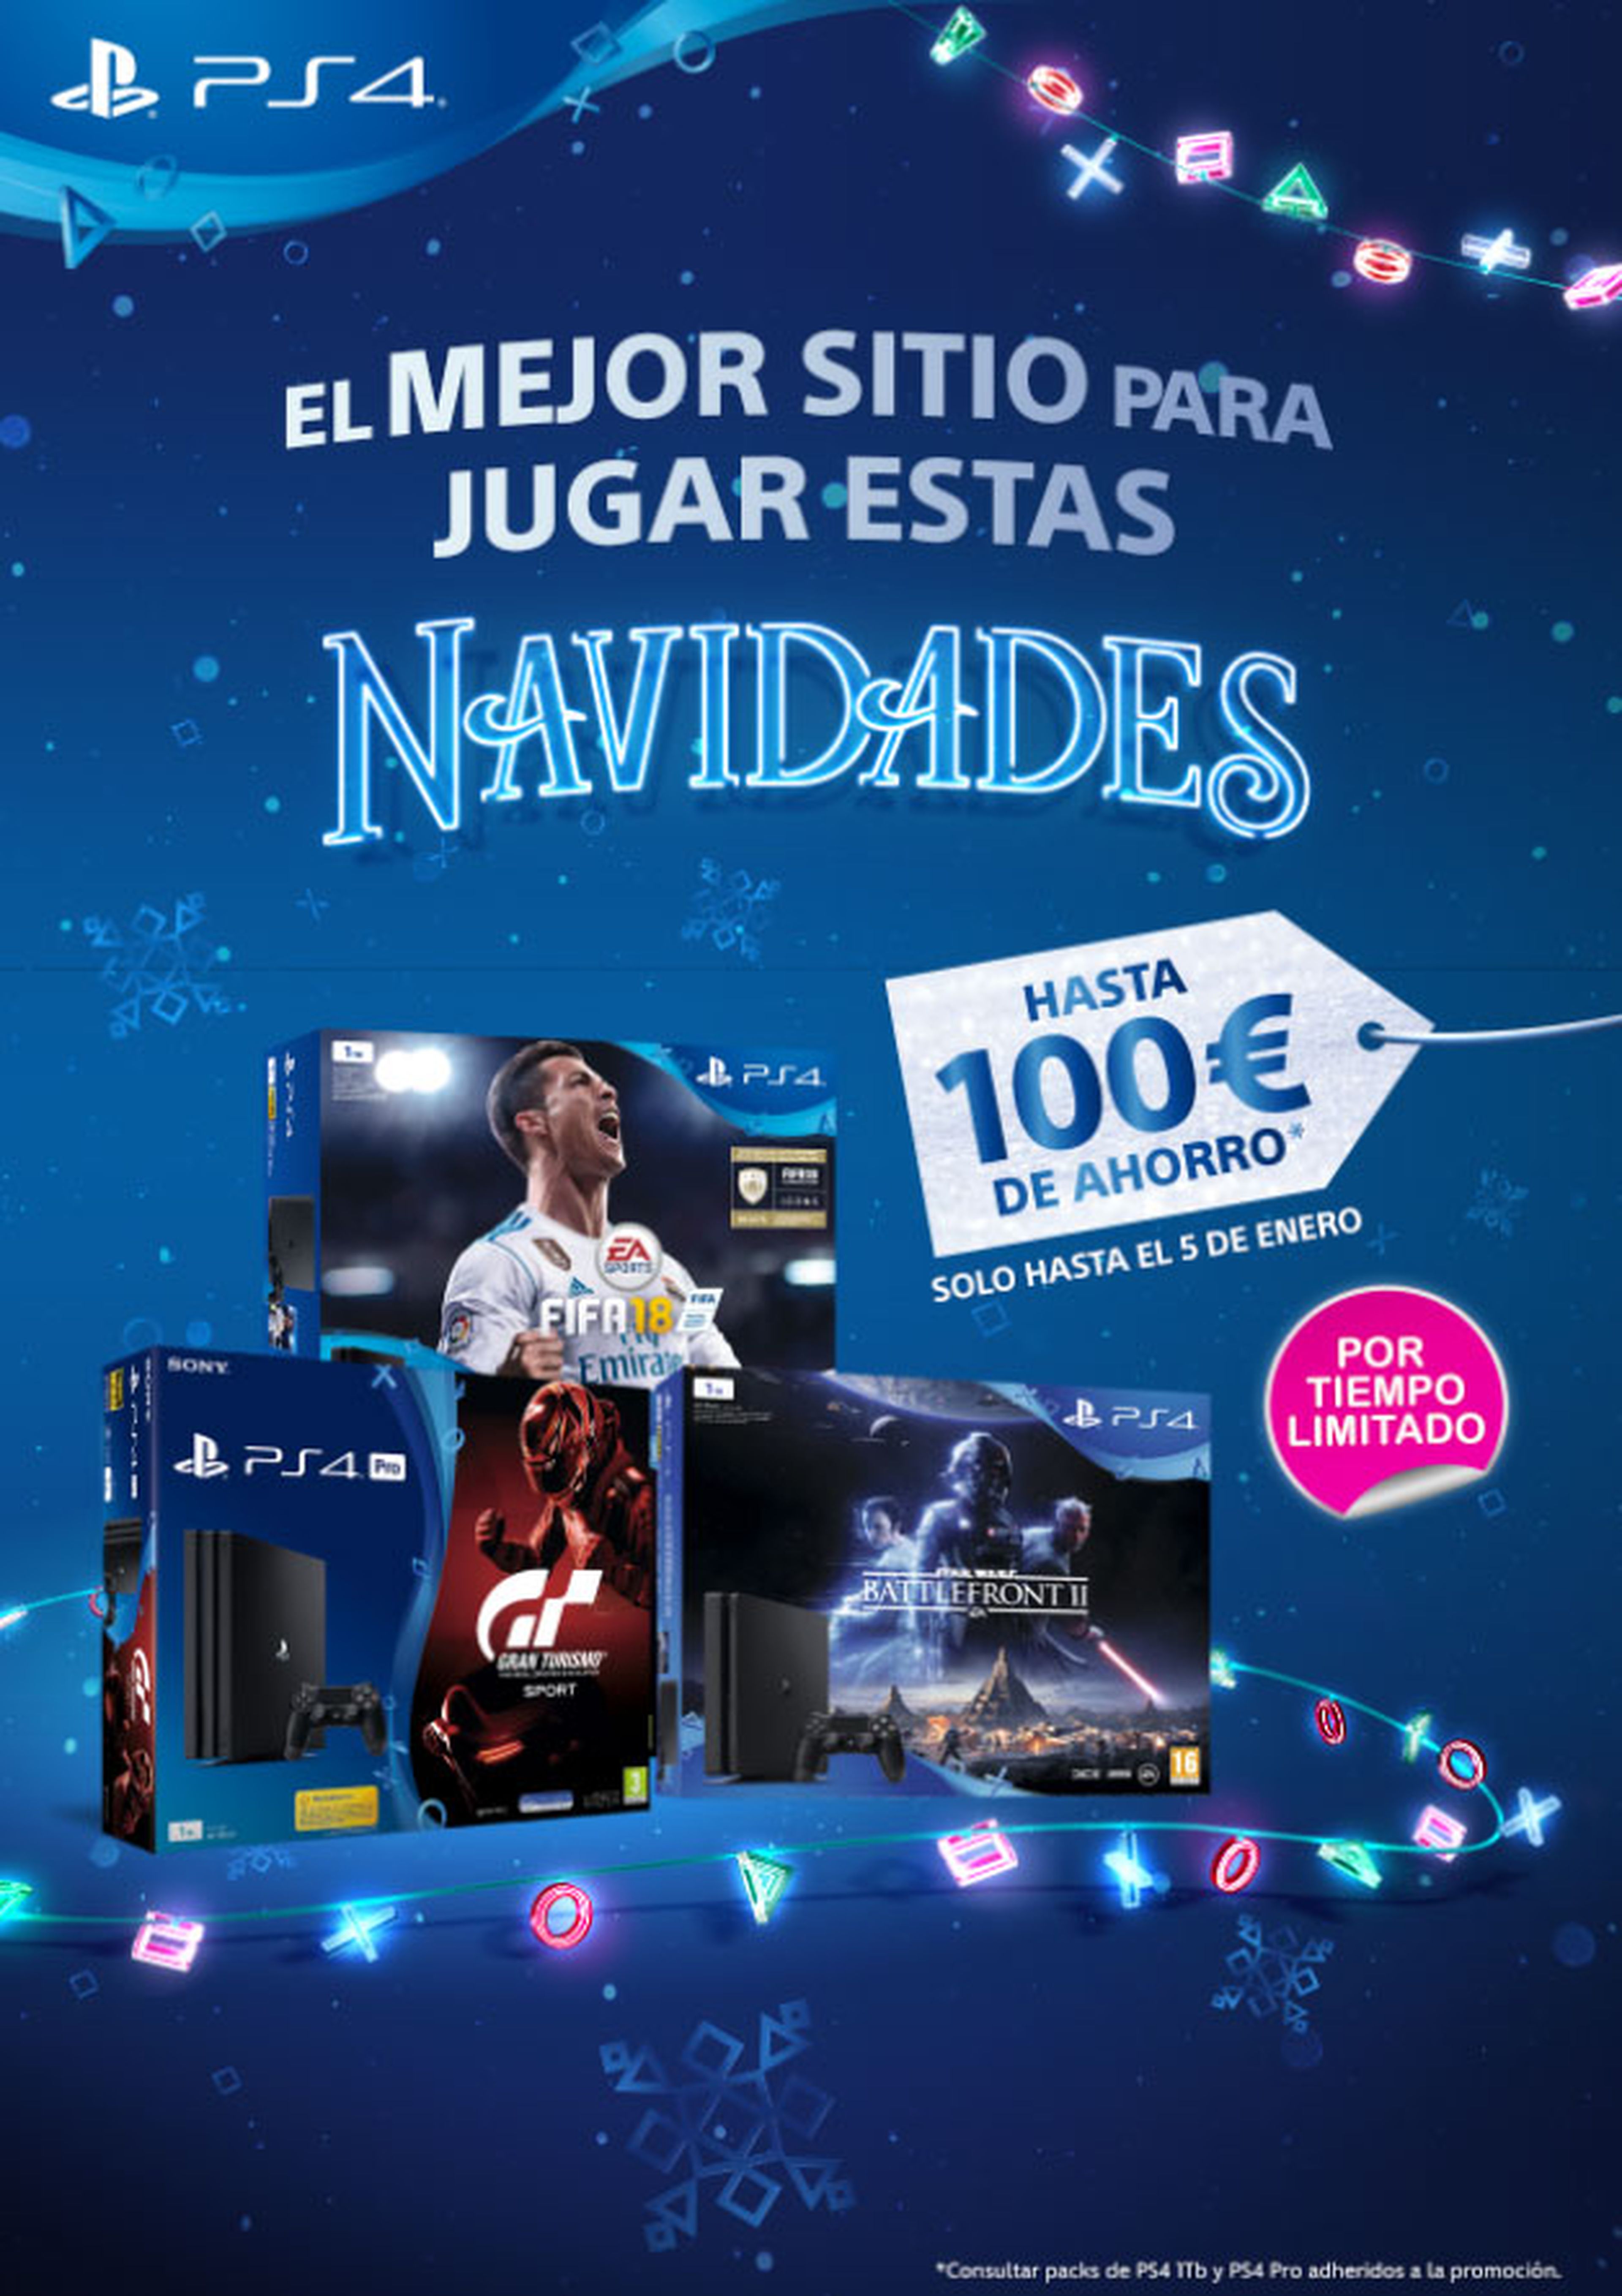 Descuentos packs PS4 1TB